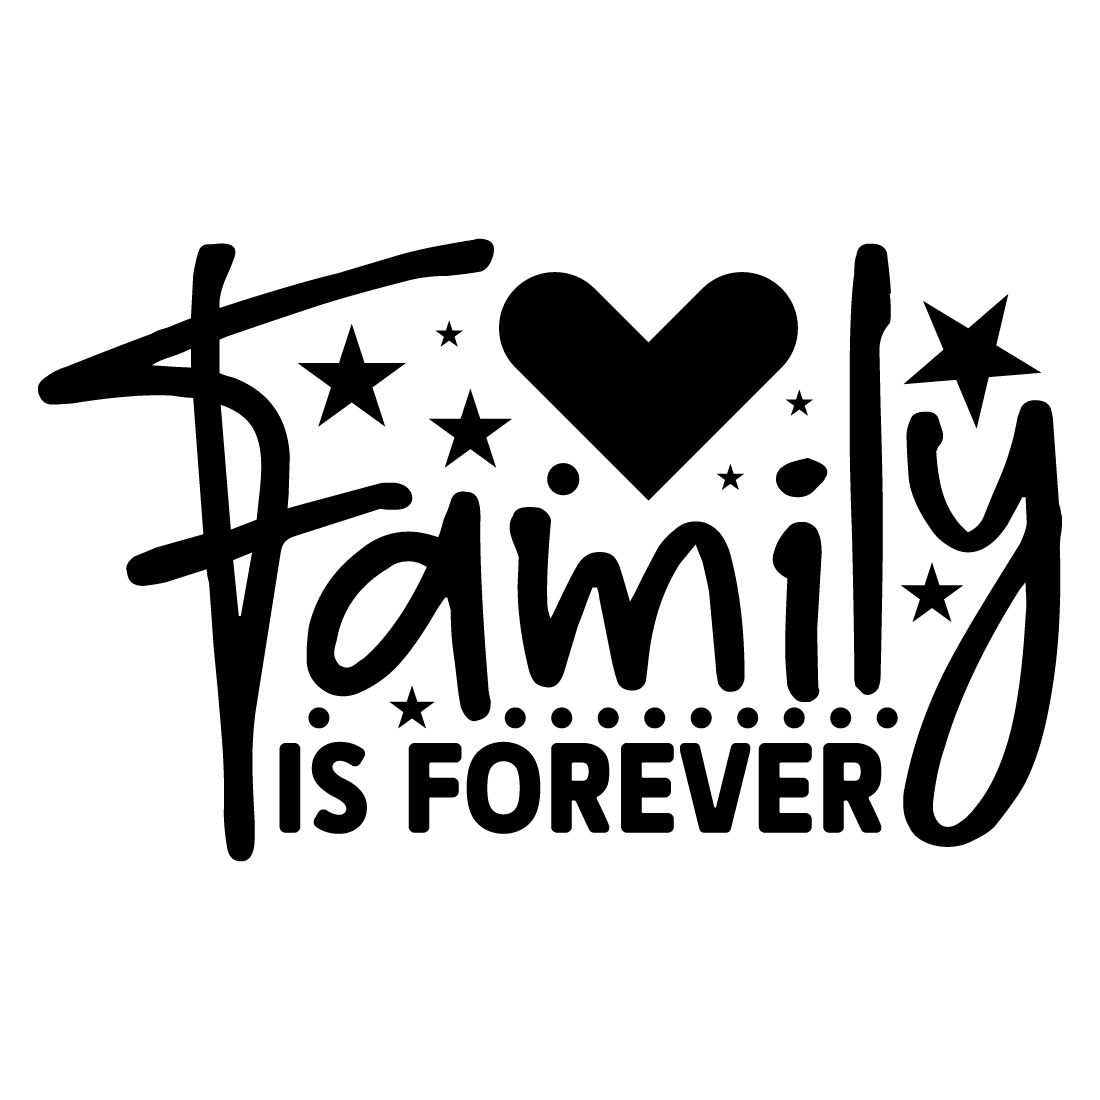 Family is forever preview image.